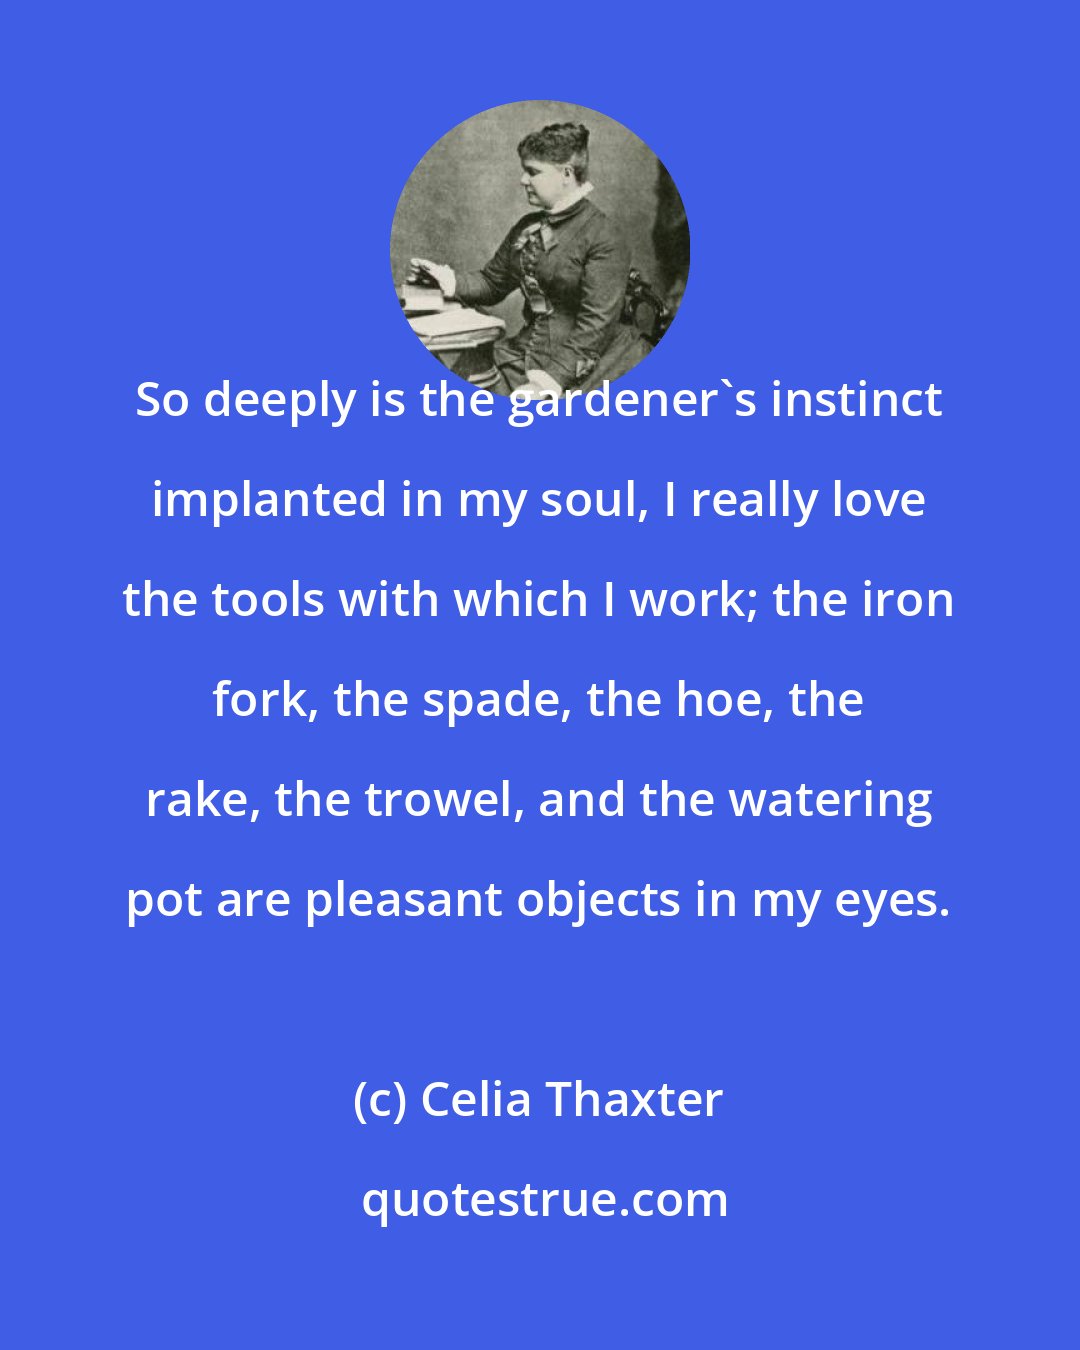 Celia Thaxter: So deeply is the gardener's instinct implanted in my soul, I really love the tools with which I work; the iron fork, the spade, the hoe, the rake, the trowel, and the watering pot are pleasant objects in my eyes.